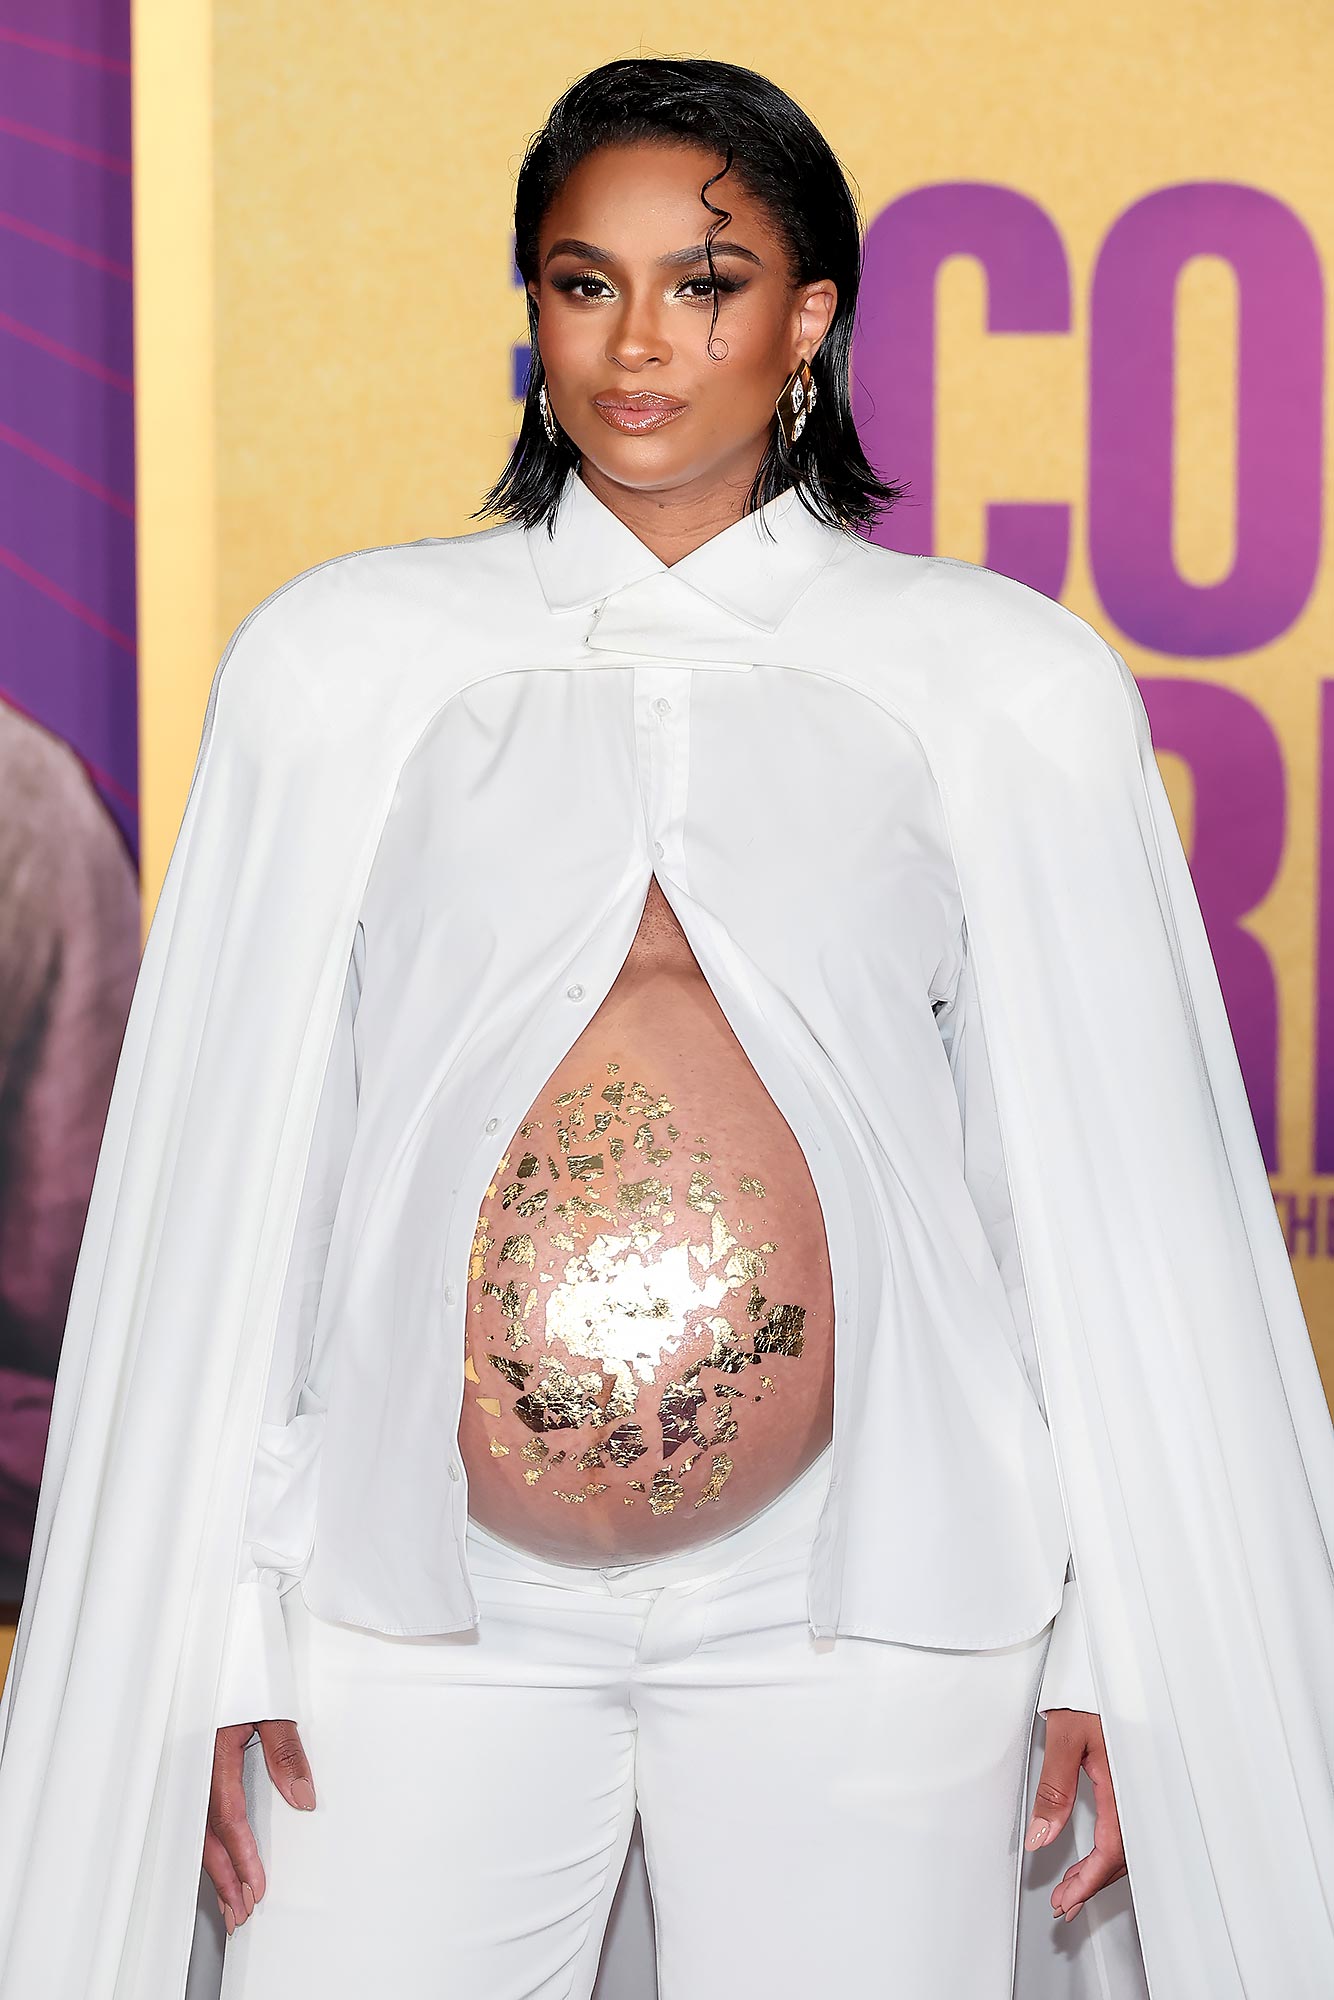 Pregnant Ciara channels Rihanna's sexy maternity style with bump-baring  crop top, low-rise jeans